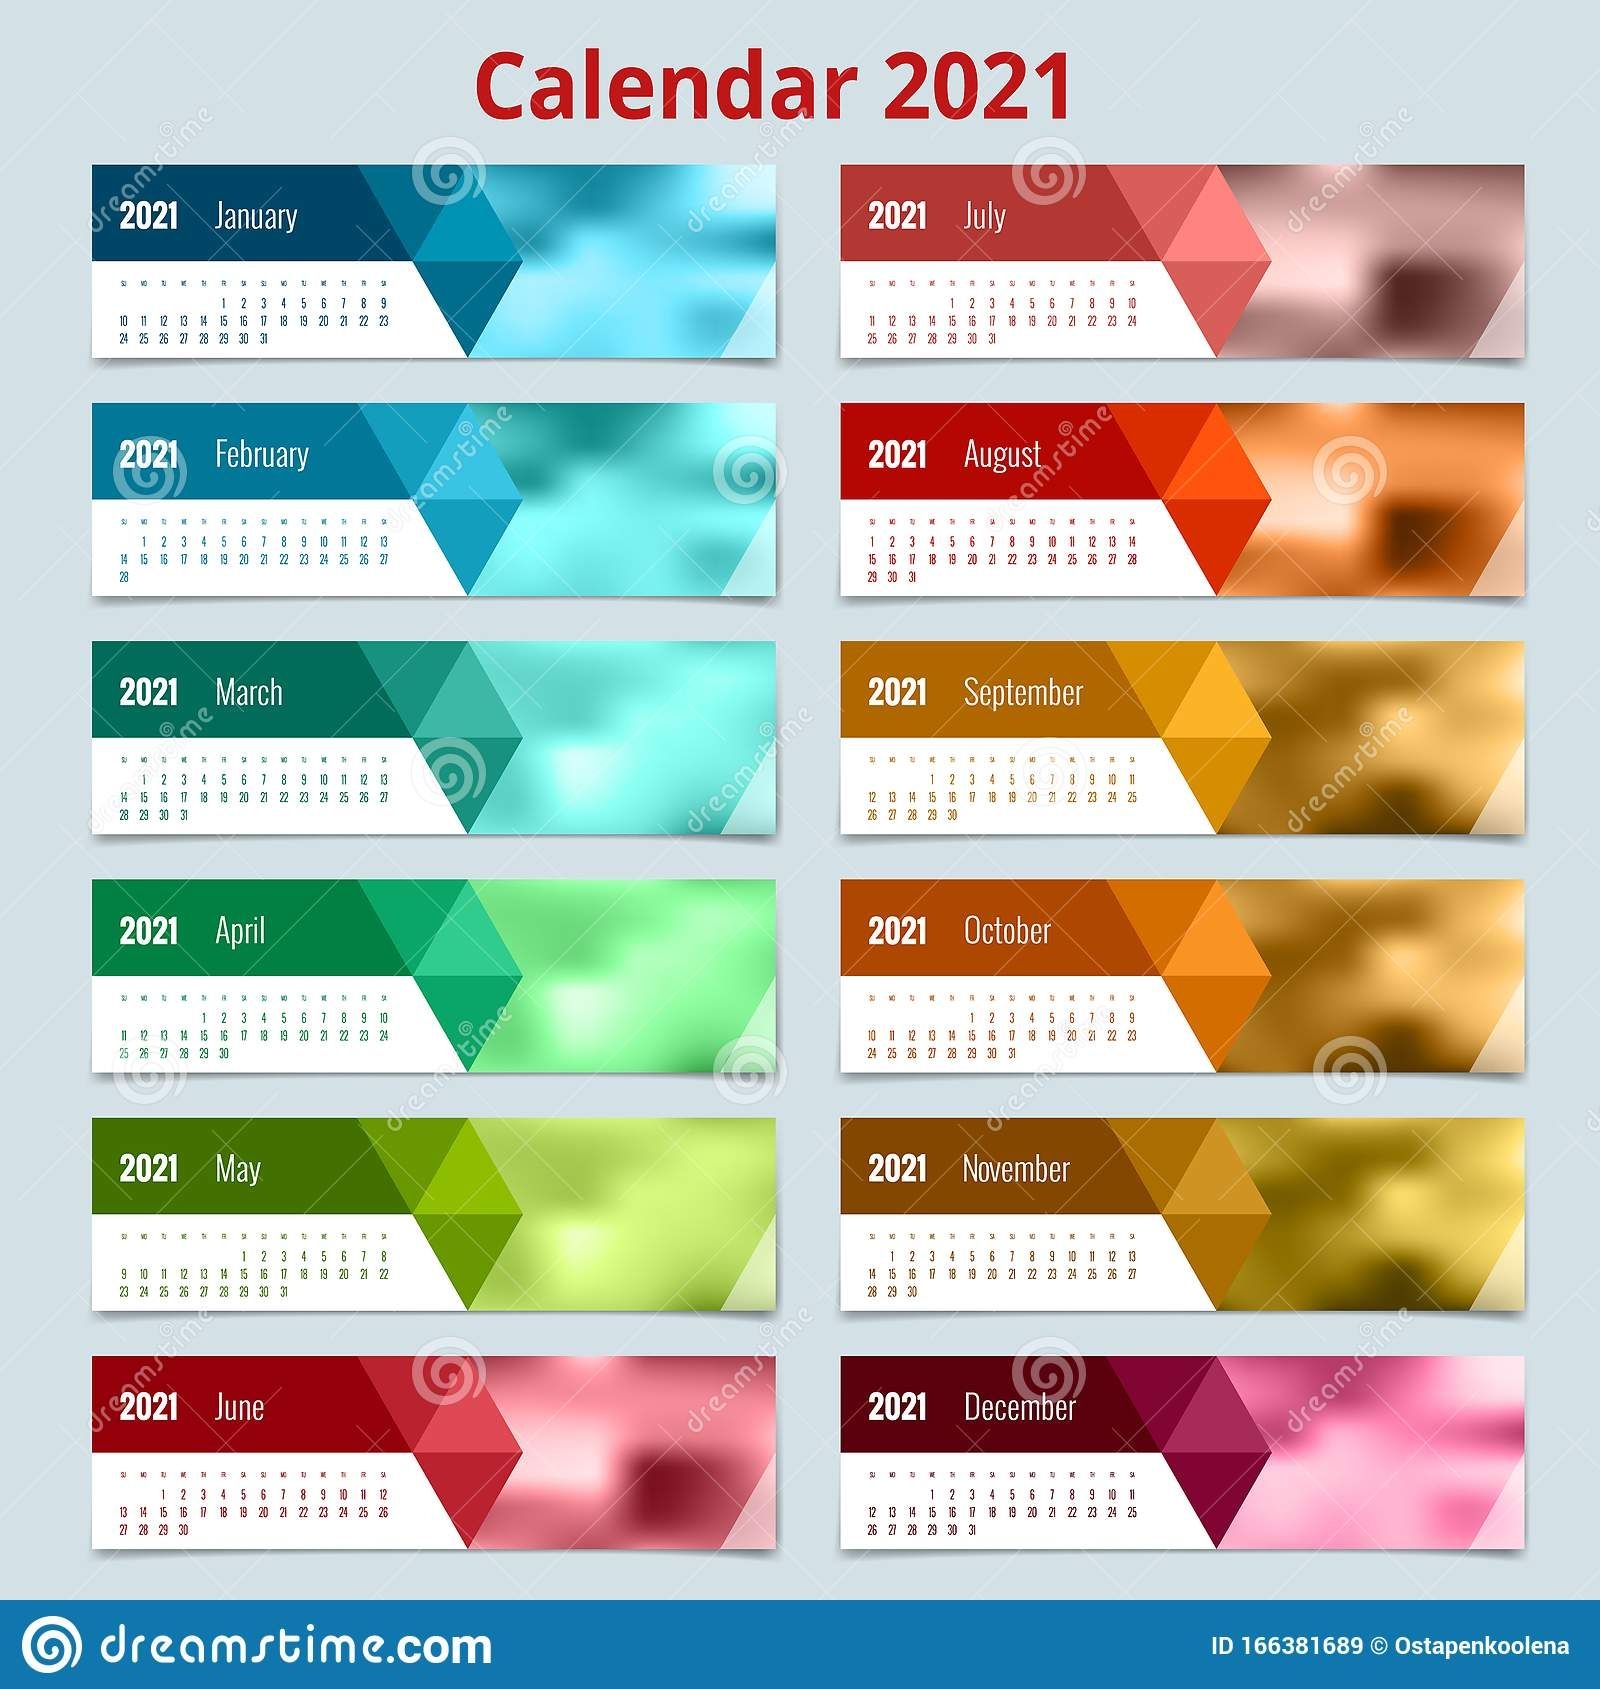 2021 calendar, print template with place for photo, your